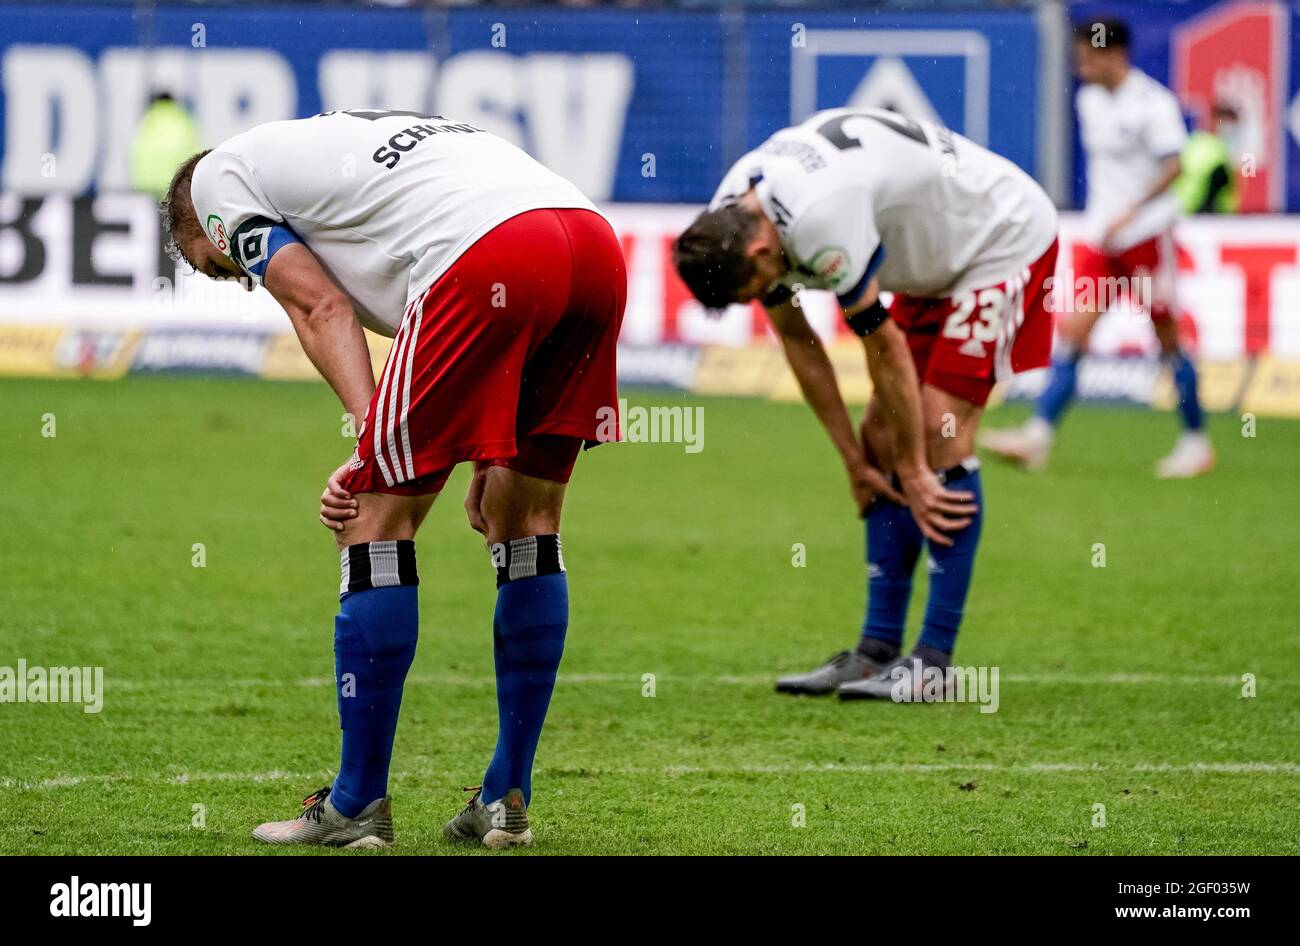 Hamburg, Germany. 22nd Aug, 2021. Football: 2nd Bundesliga, Hamburger SV - Darmstadt 98, Matchday 4 at Volksparkstadion. Hamburg's Sebastian Schonlau (l) and Hamburg's Jonas Meffert stand on the pitch after the match. Credit: Axel Heimken/dpa - IMPORTANT NOTE: In accordance with the regulations of the DFL Deutsche Fußball Liga and/or the DFB Deutscher Fußball-Bund, it is prohibited to use or have used photographs taken in the stadium and/or of the match in the form of sequence pictures and/or video-like photo series./dpa/Alamy Live News Stock Photo